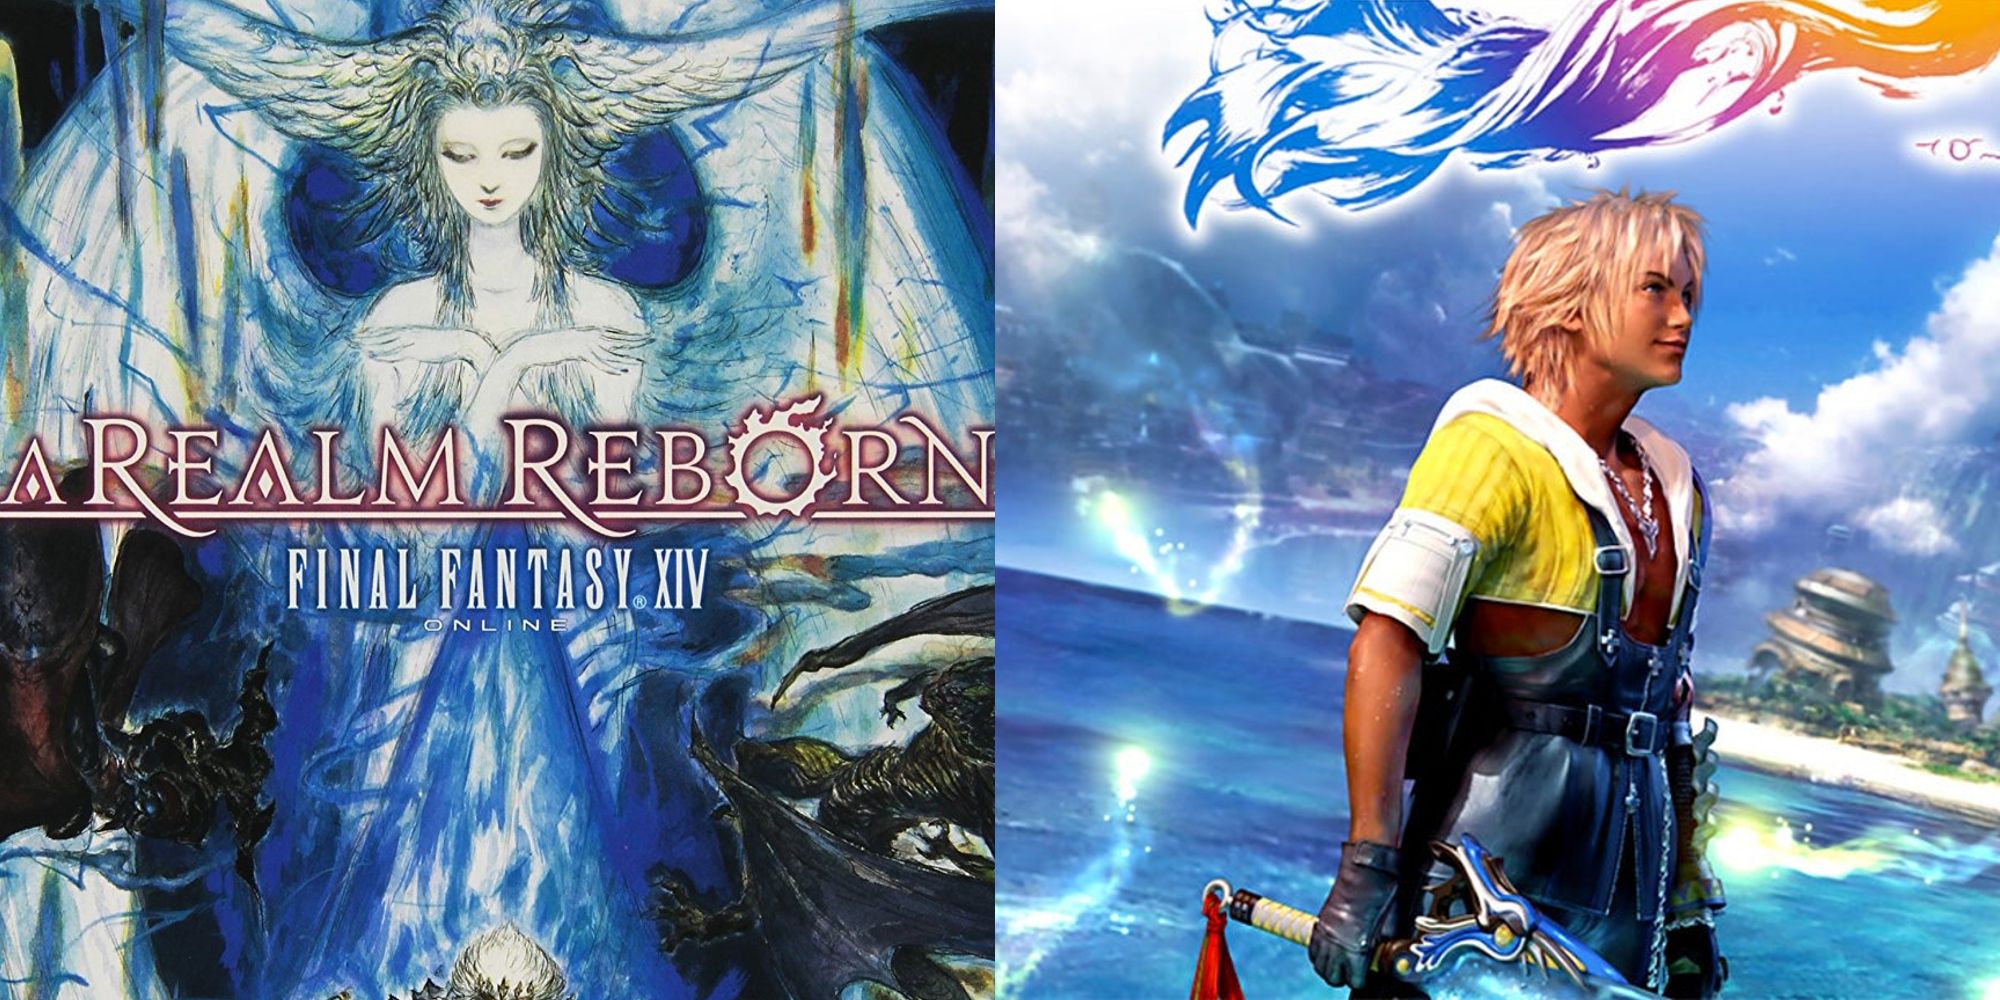 Final Fantasy Cover Art FFX and FFXIV side-by-side